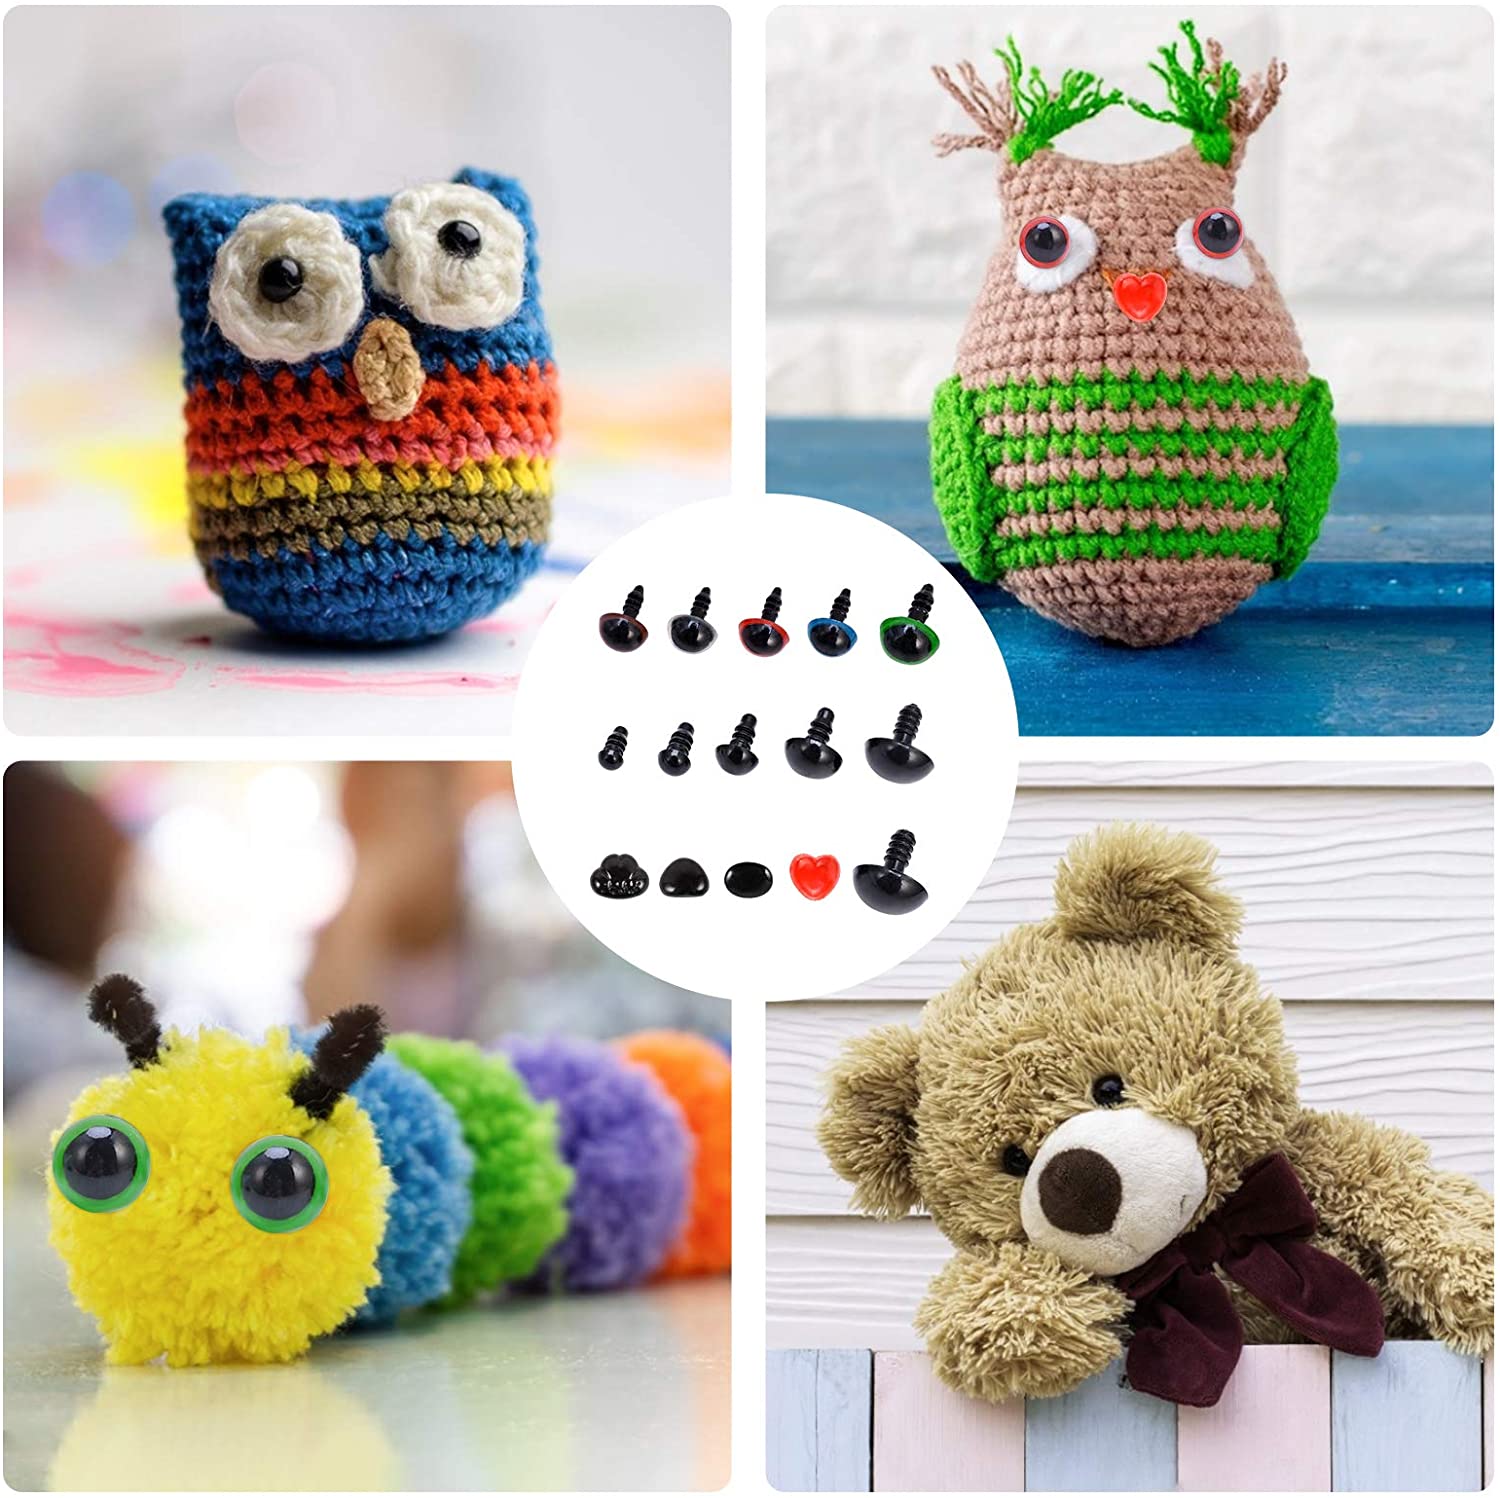 Willstar 580pcs Doll Safety Eyes Noses,Colorful Safety Eyes Noses for Crafts Crochet Stuffed Animals Plastic Multicolor 6mm 10mm 12mm 14mm 16mm 18mm